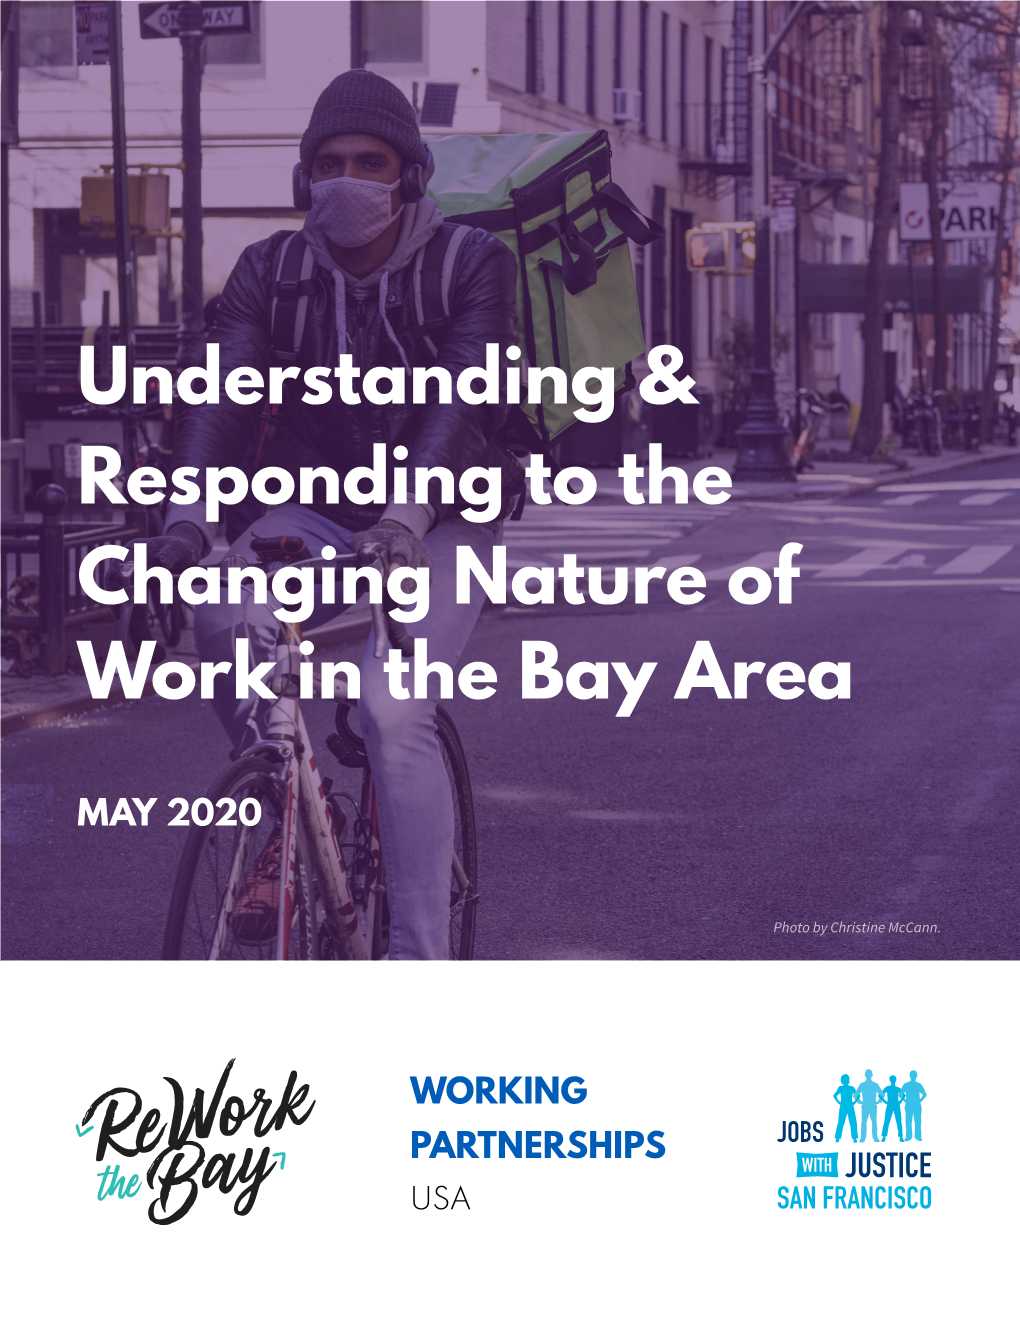 Understanding & Responding to the Changing Nature of Work in the Bay